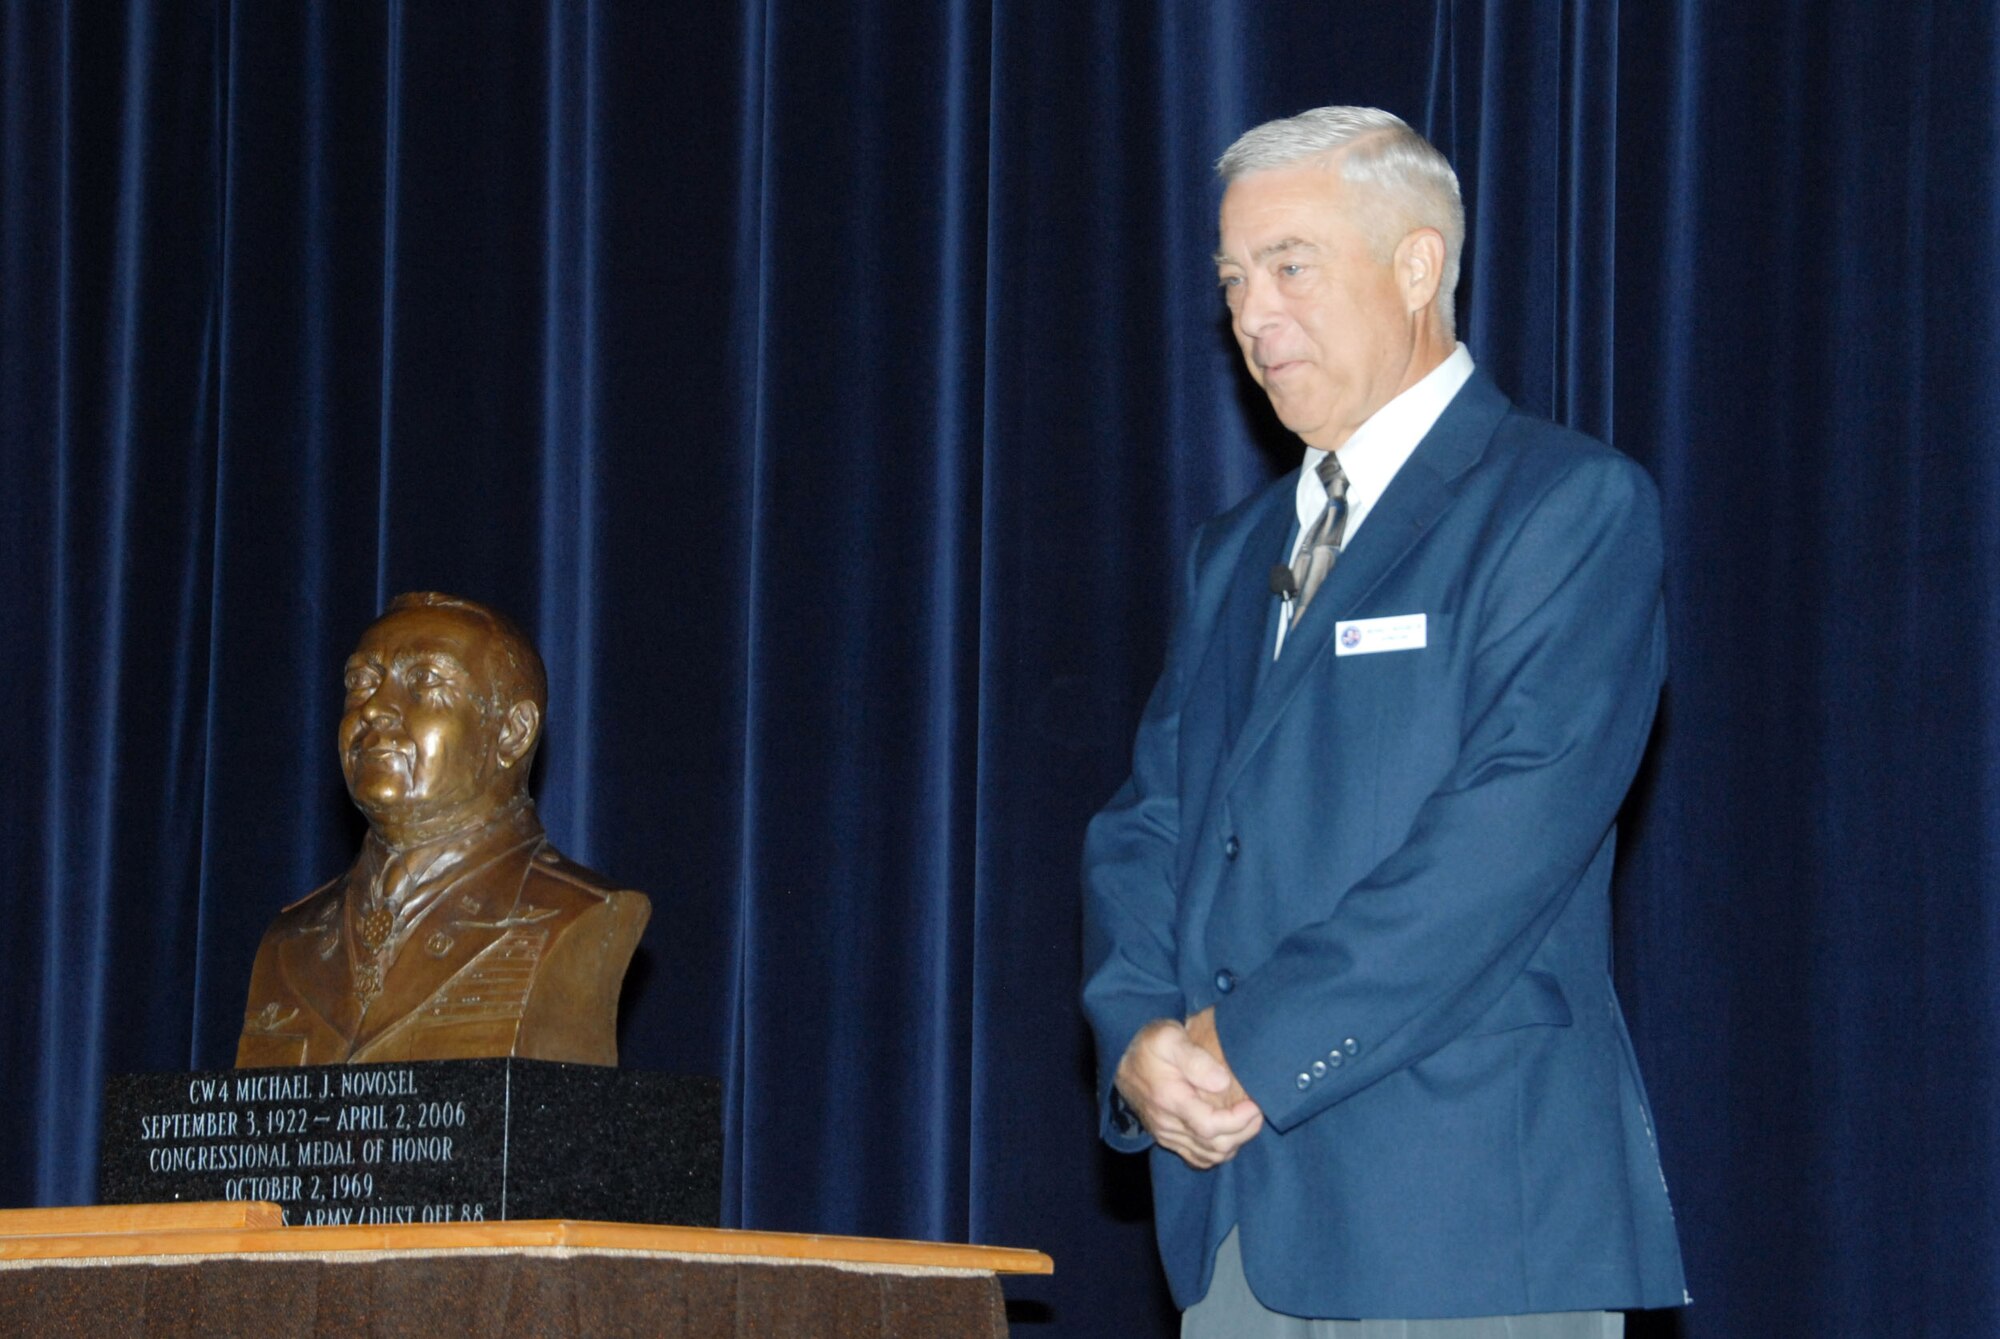 During a ceremony at Air Command and Staff College Wednesday to dedicate a bronze bust of his father, retired Army Chief Warrant Officer 4 Michael Novosel Jr. talked about his dad, CW4 Michael Novosel Sr. The Medal of Honor was bestowed upon CW4 Novosel Sr. in Oct. 1969 for saving the lives of 29 soldiers during an engagement of the Vietnam War. (U.S. Air Force photo/Bennett Rock) 
